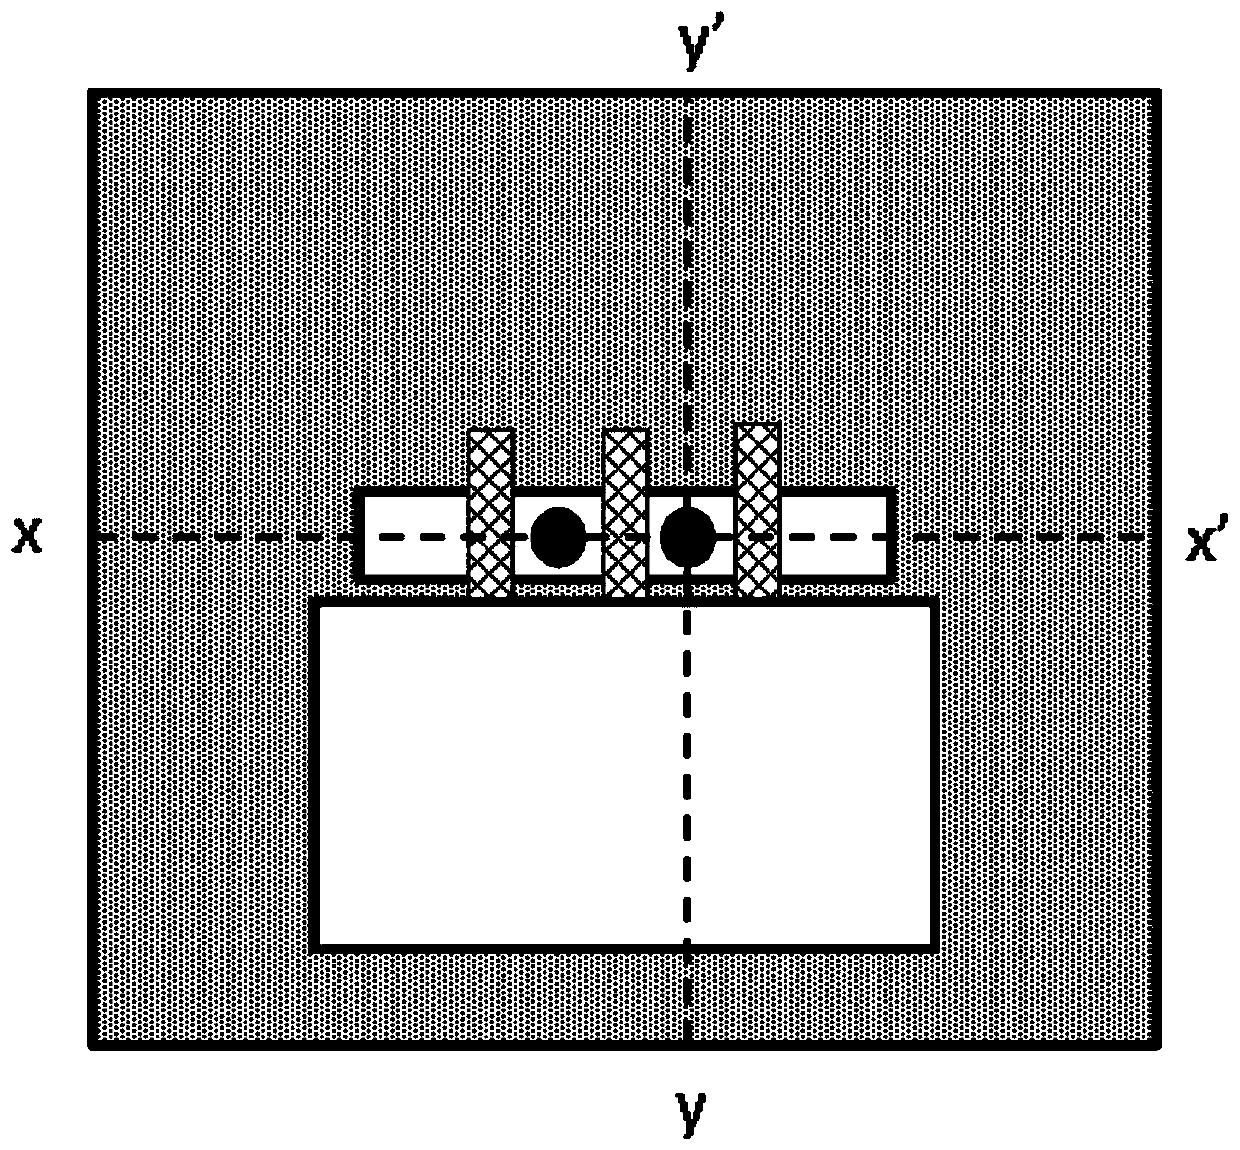 Method for Junction Staining of Transmission Electron Microscopy Samples